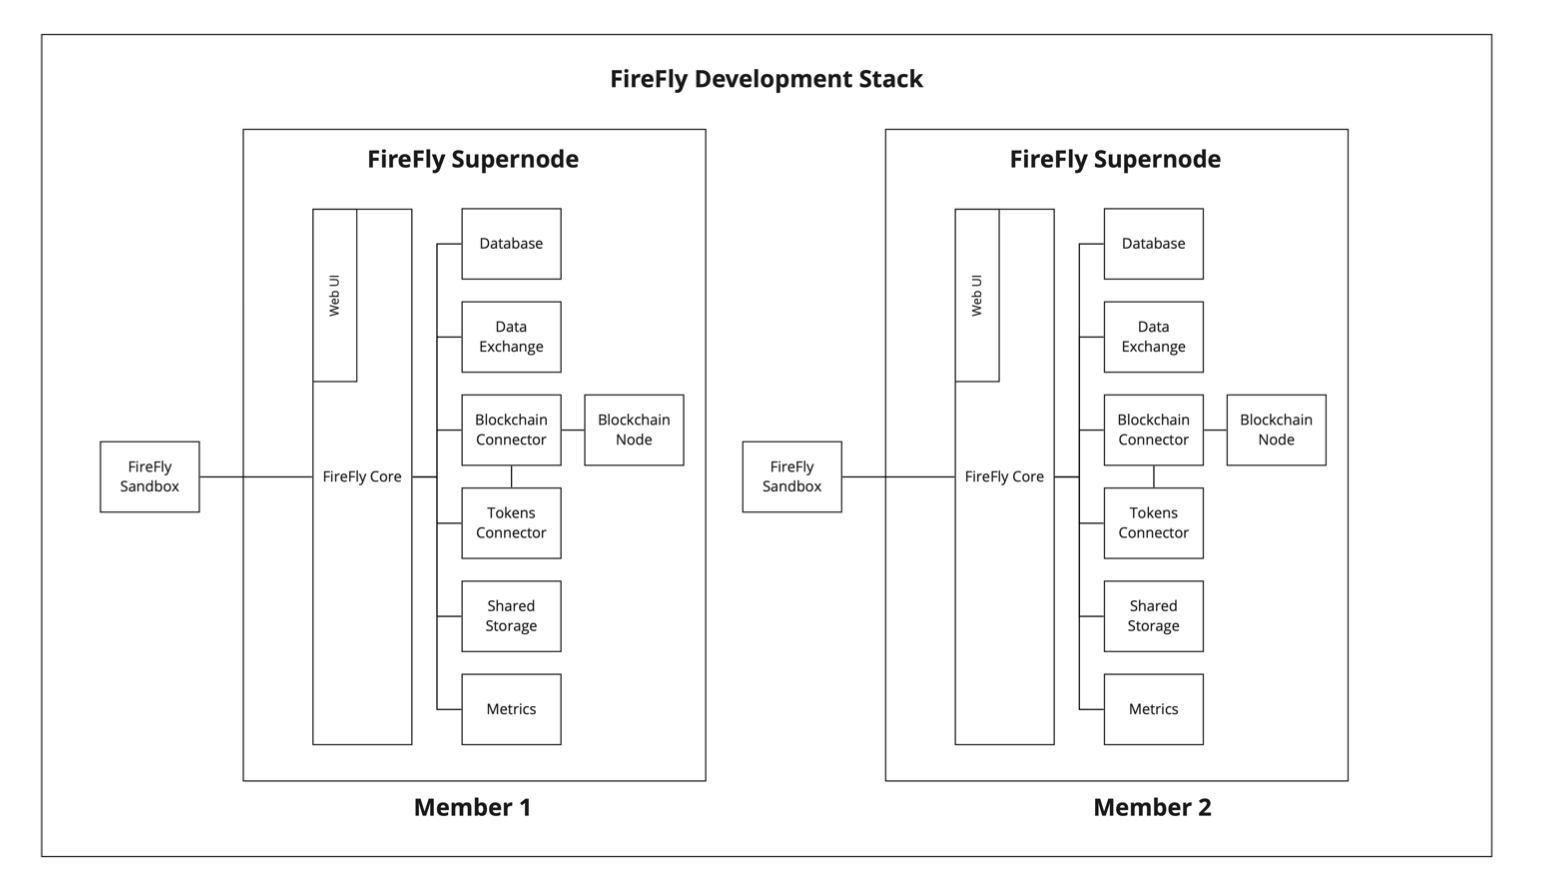 Image of the FireFly development stack